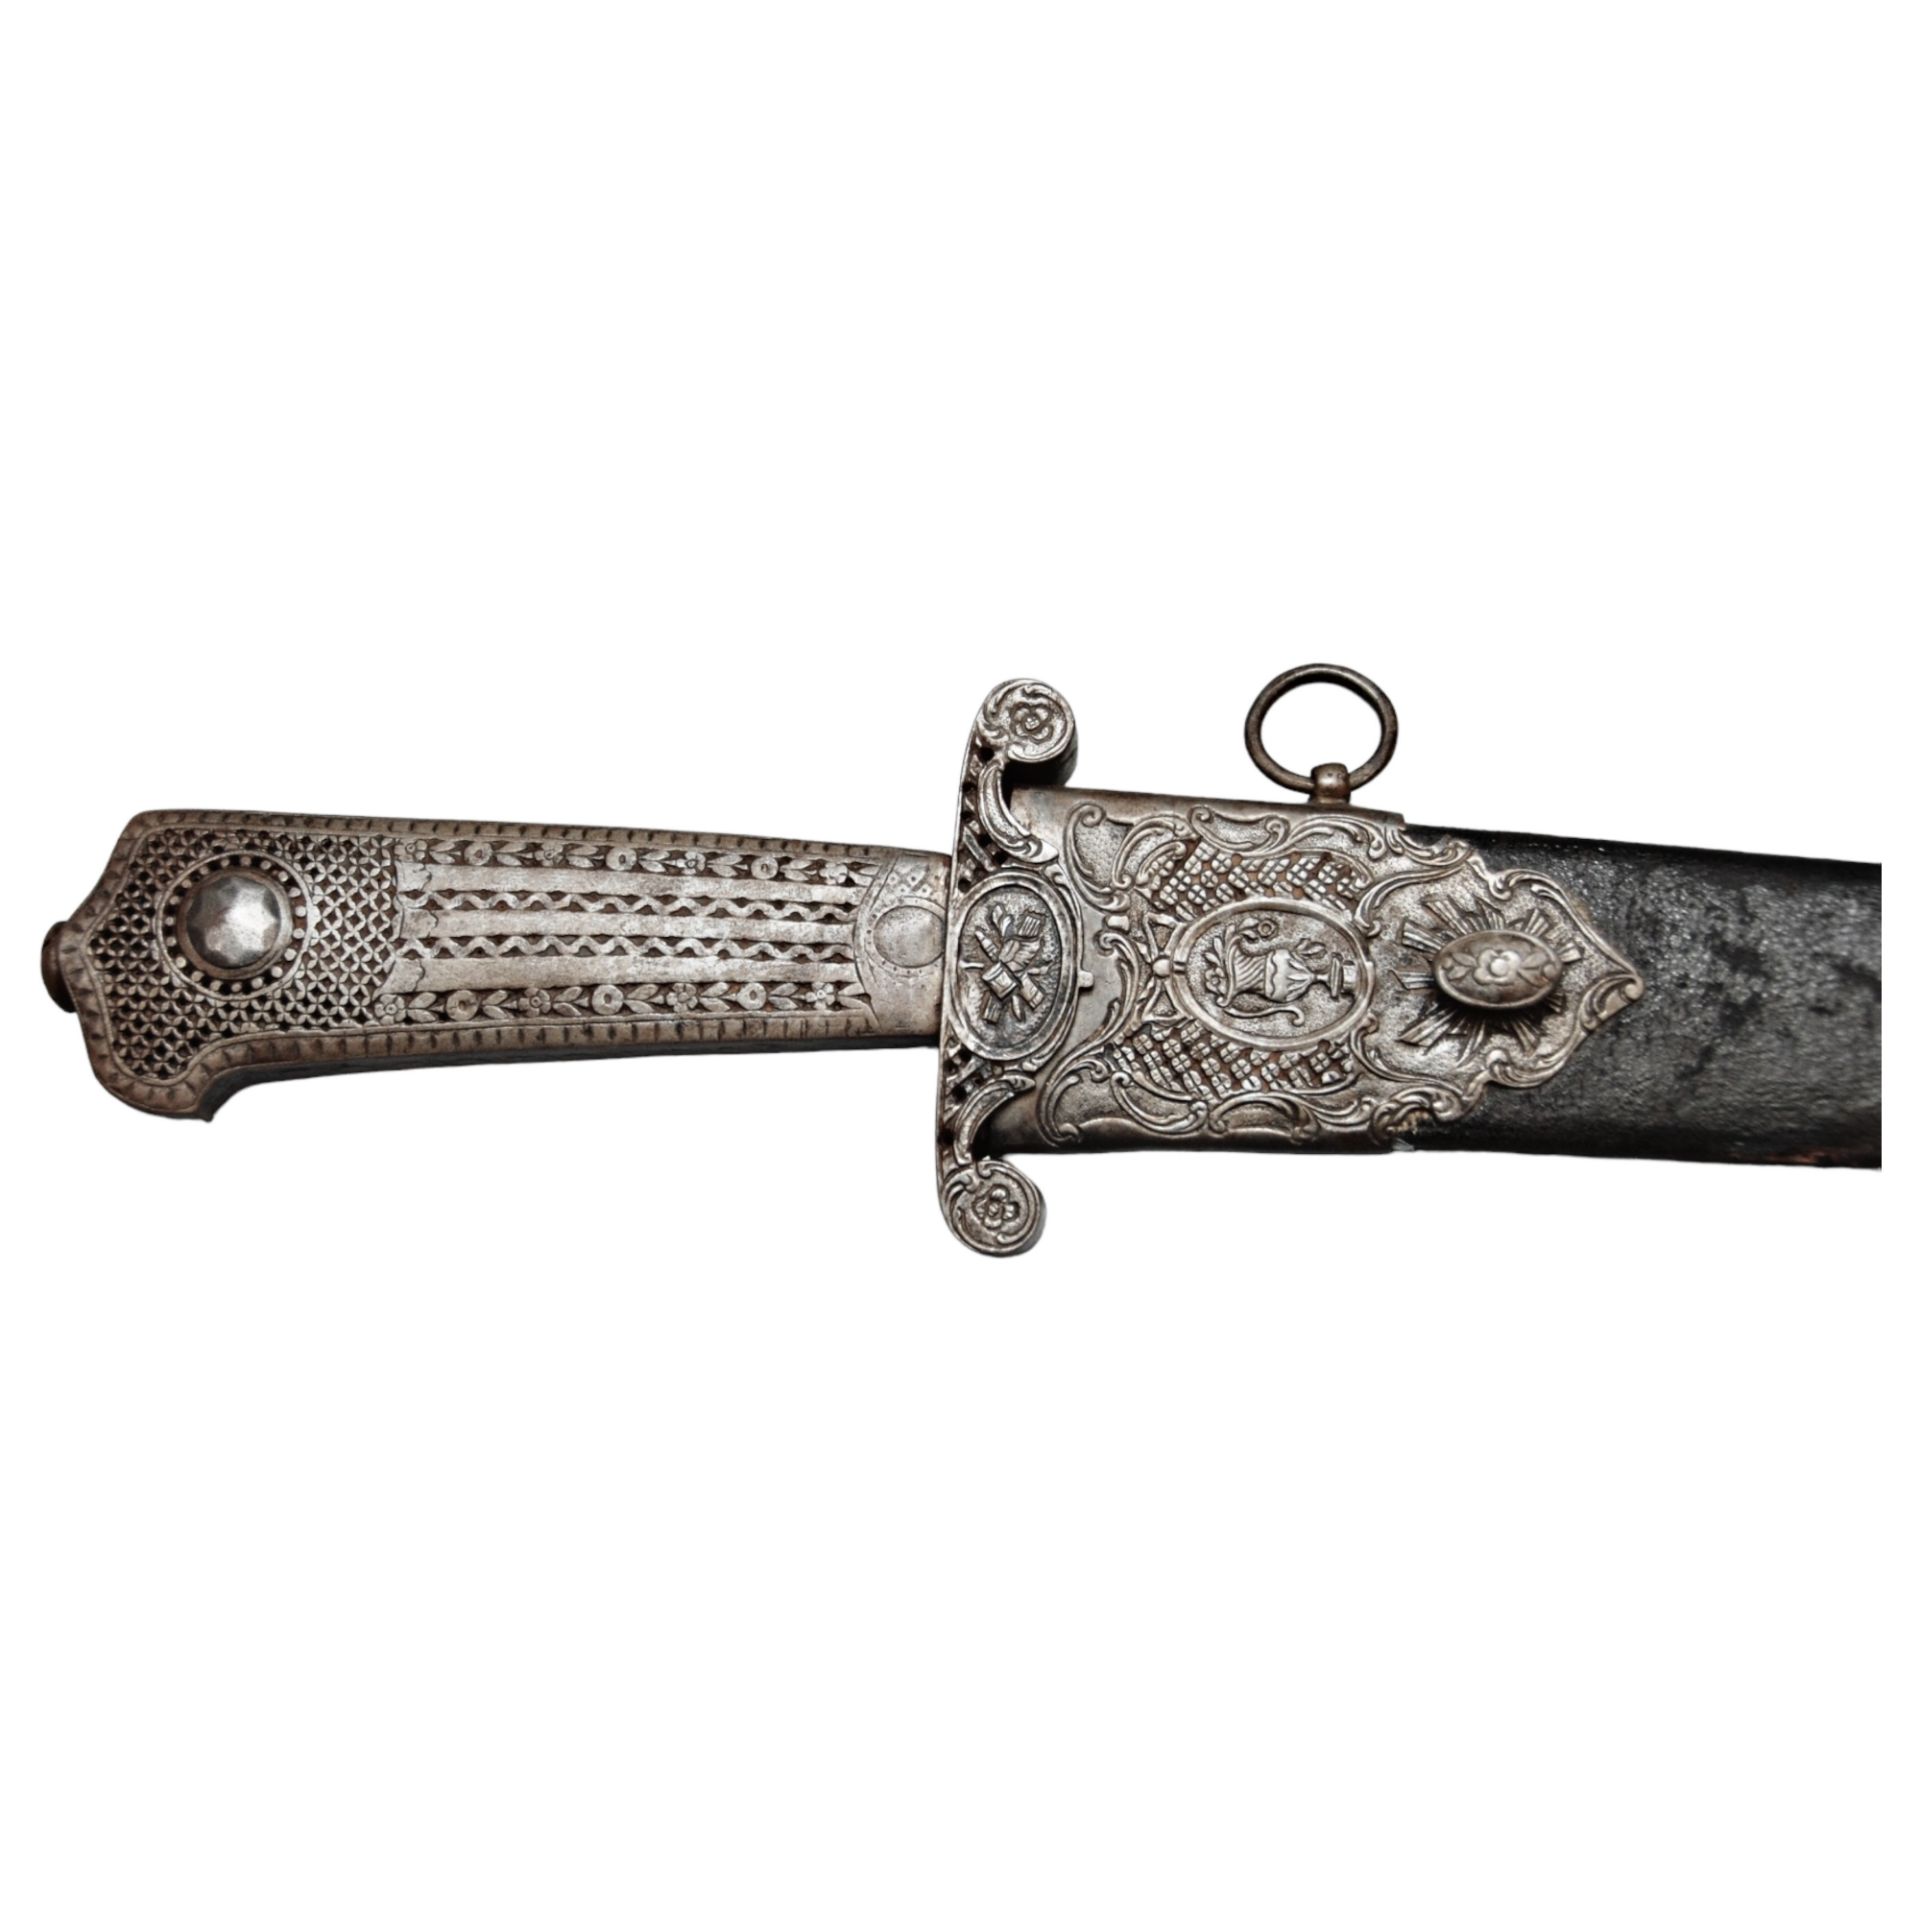 A Hunting dagger, France, second half of the 18th century. - Image 3 of 6